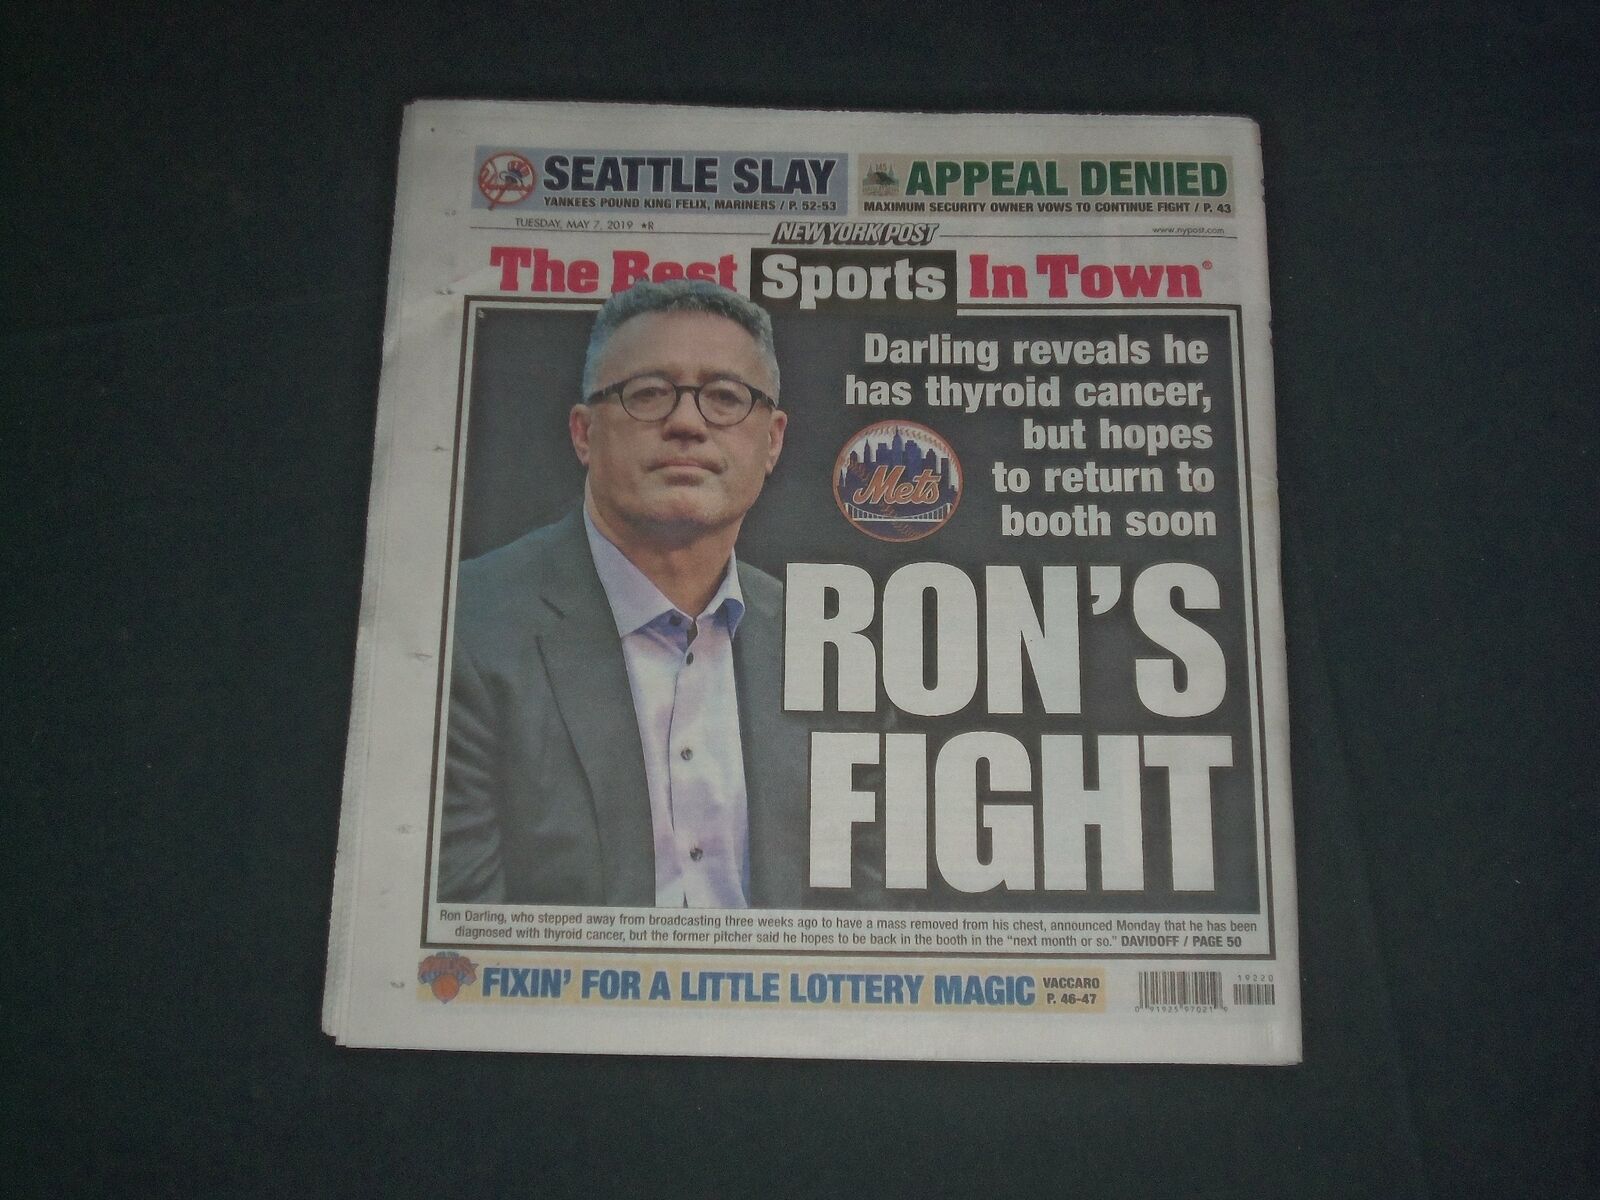 2019 MAY 7 NEW YORK POST NEWSPAPER - RON DARLING REVEALS HE HAS THYROID CANCER